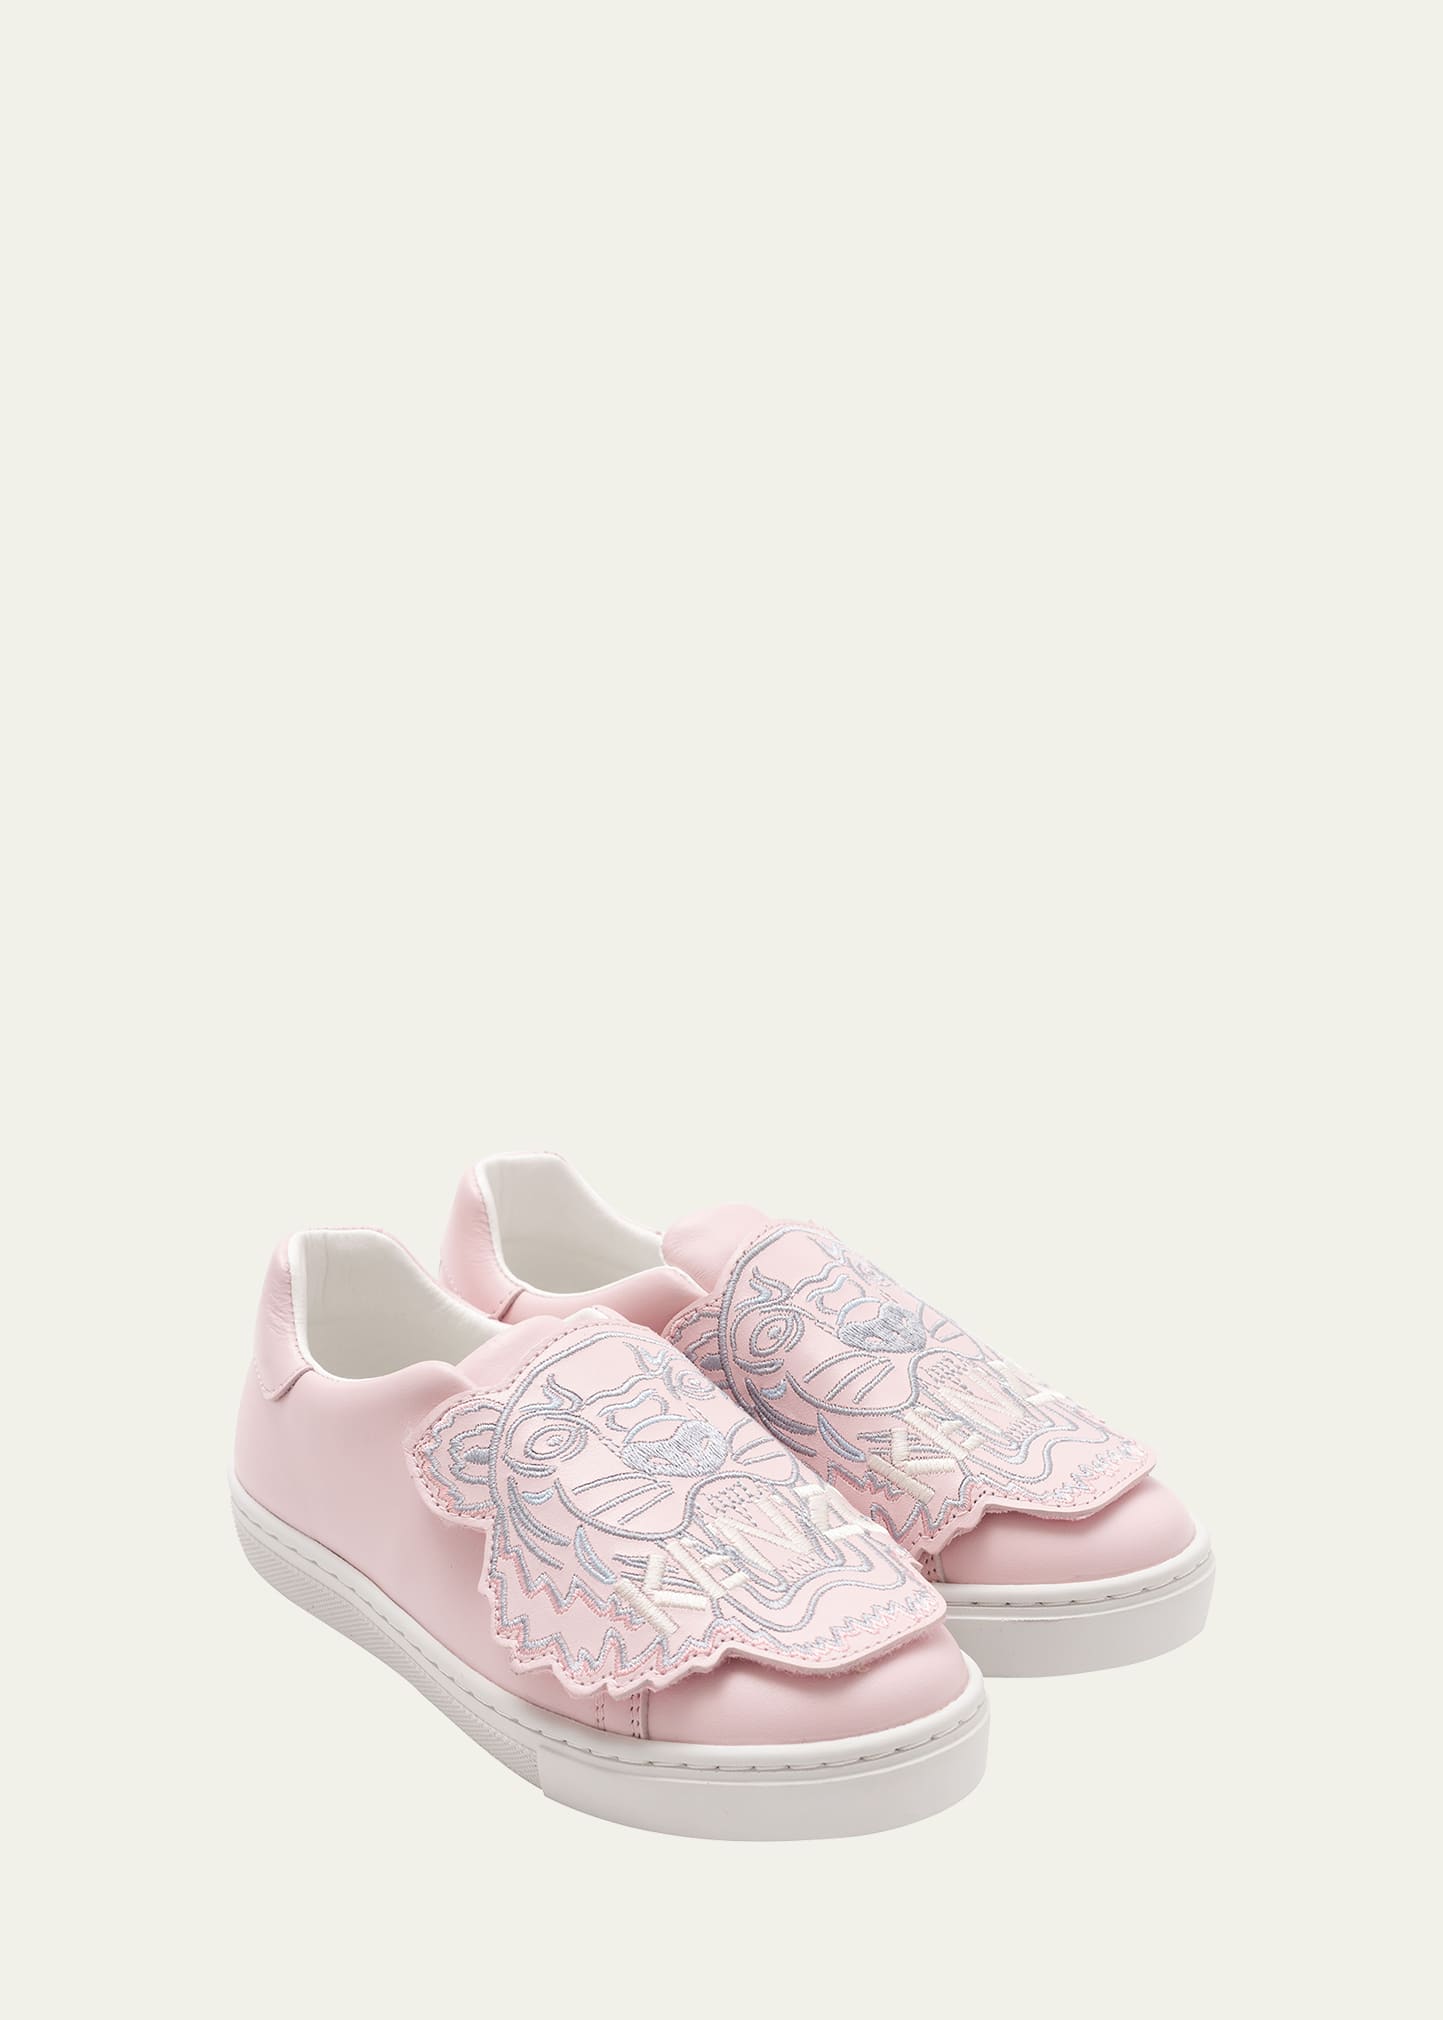 Kenzo Kid's Tiger Leather Low-top Sneakers, Toddler/kids In Pink